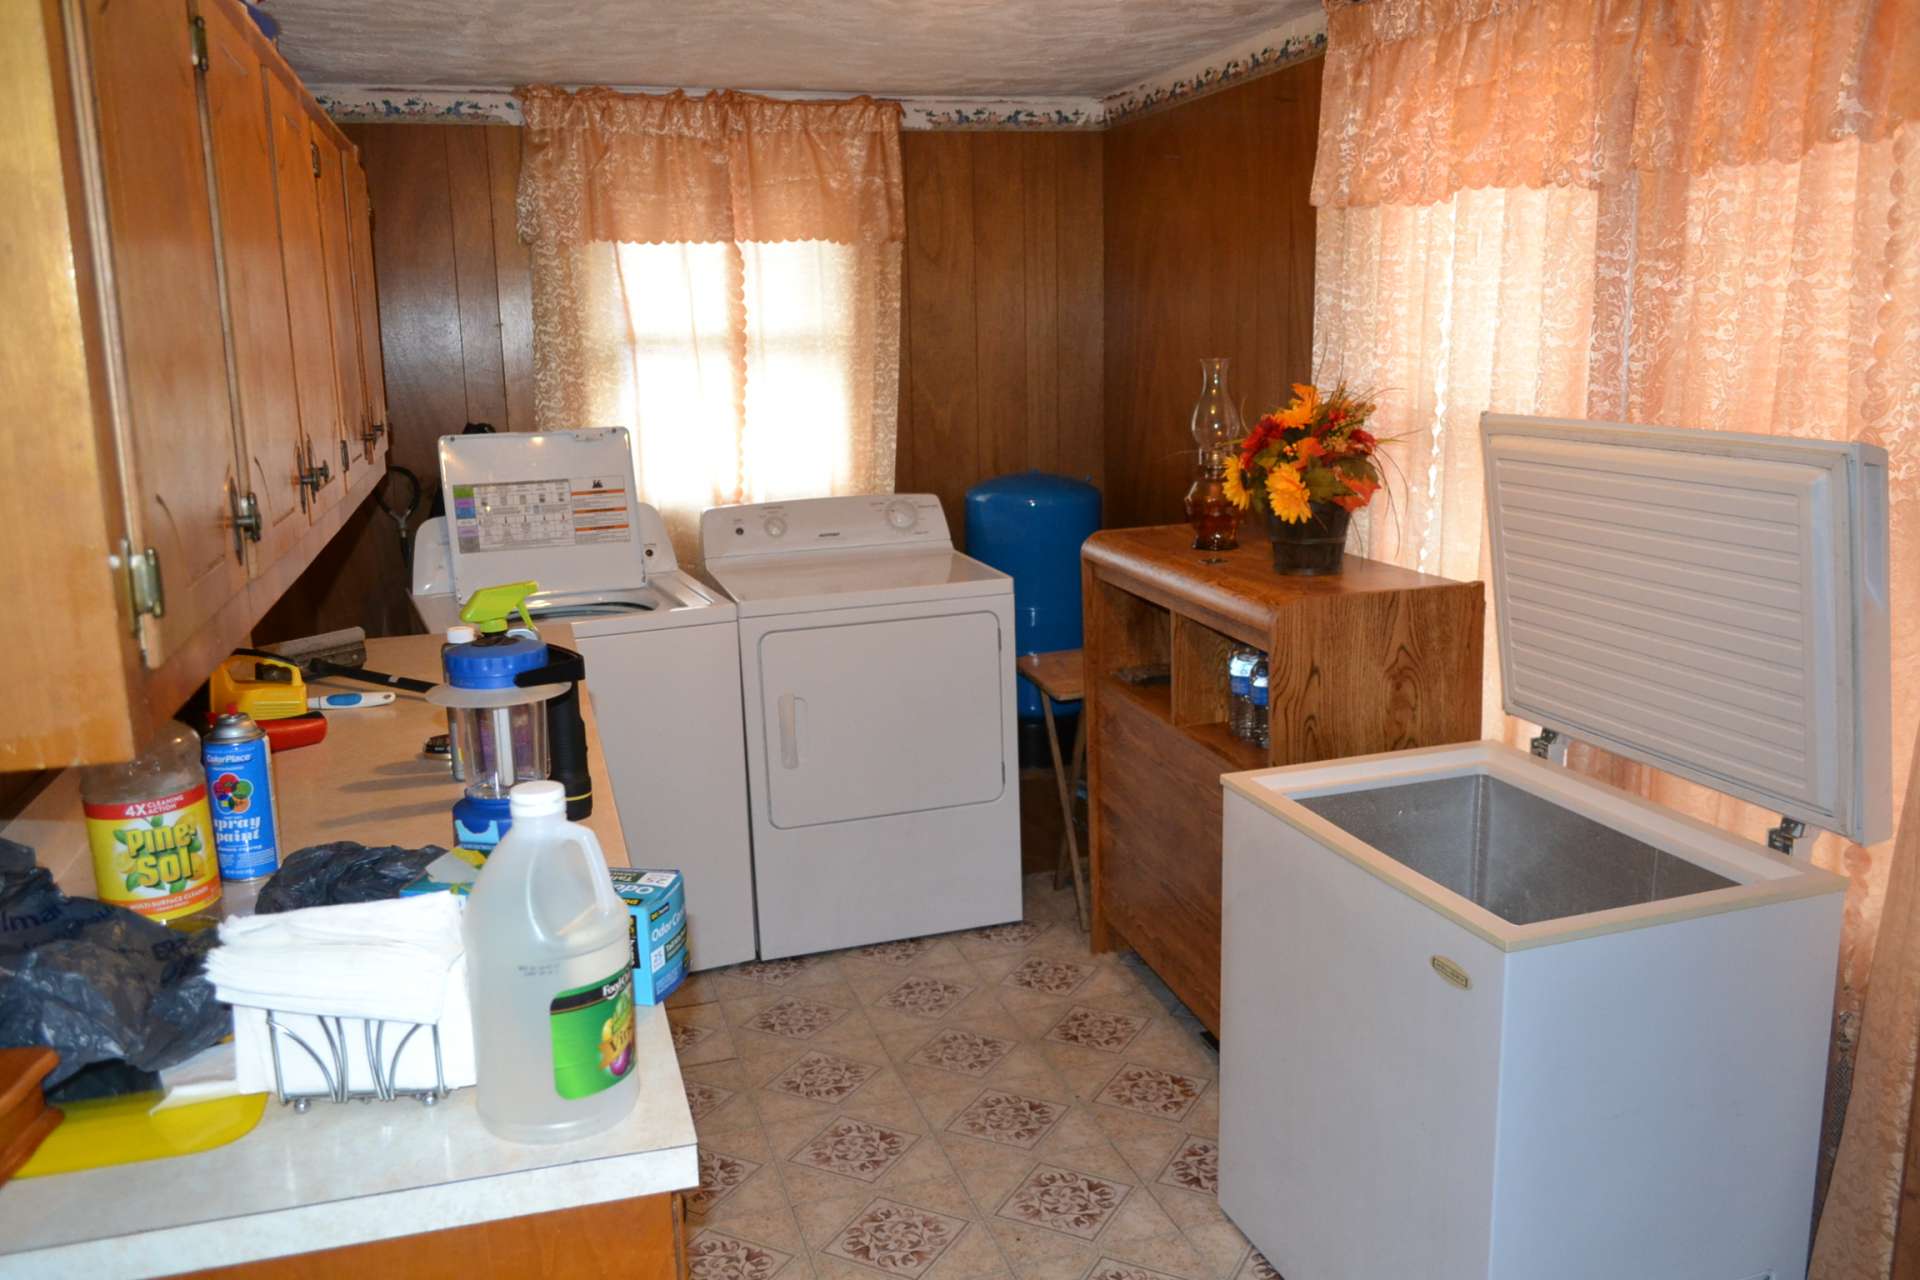 Accessed from the kitchen and this room is home to the laundry area and perfect for storage or mud room with access to and from the outdoors.